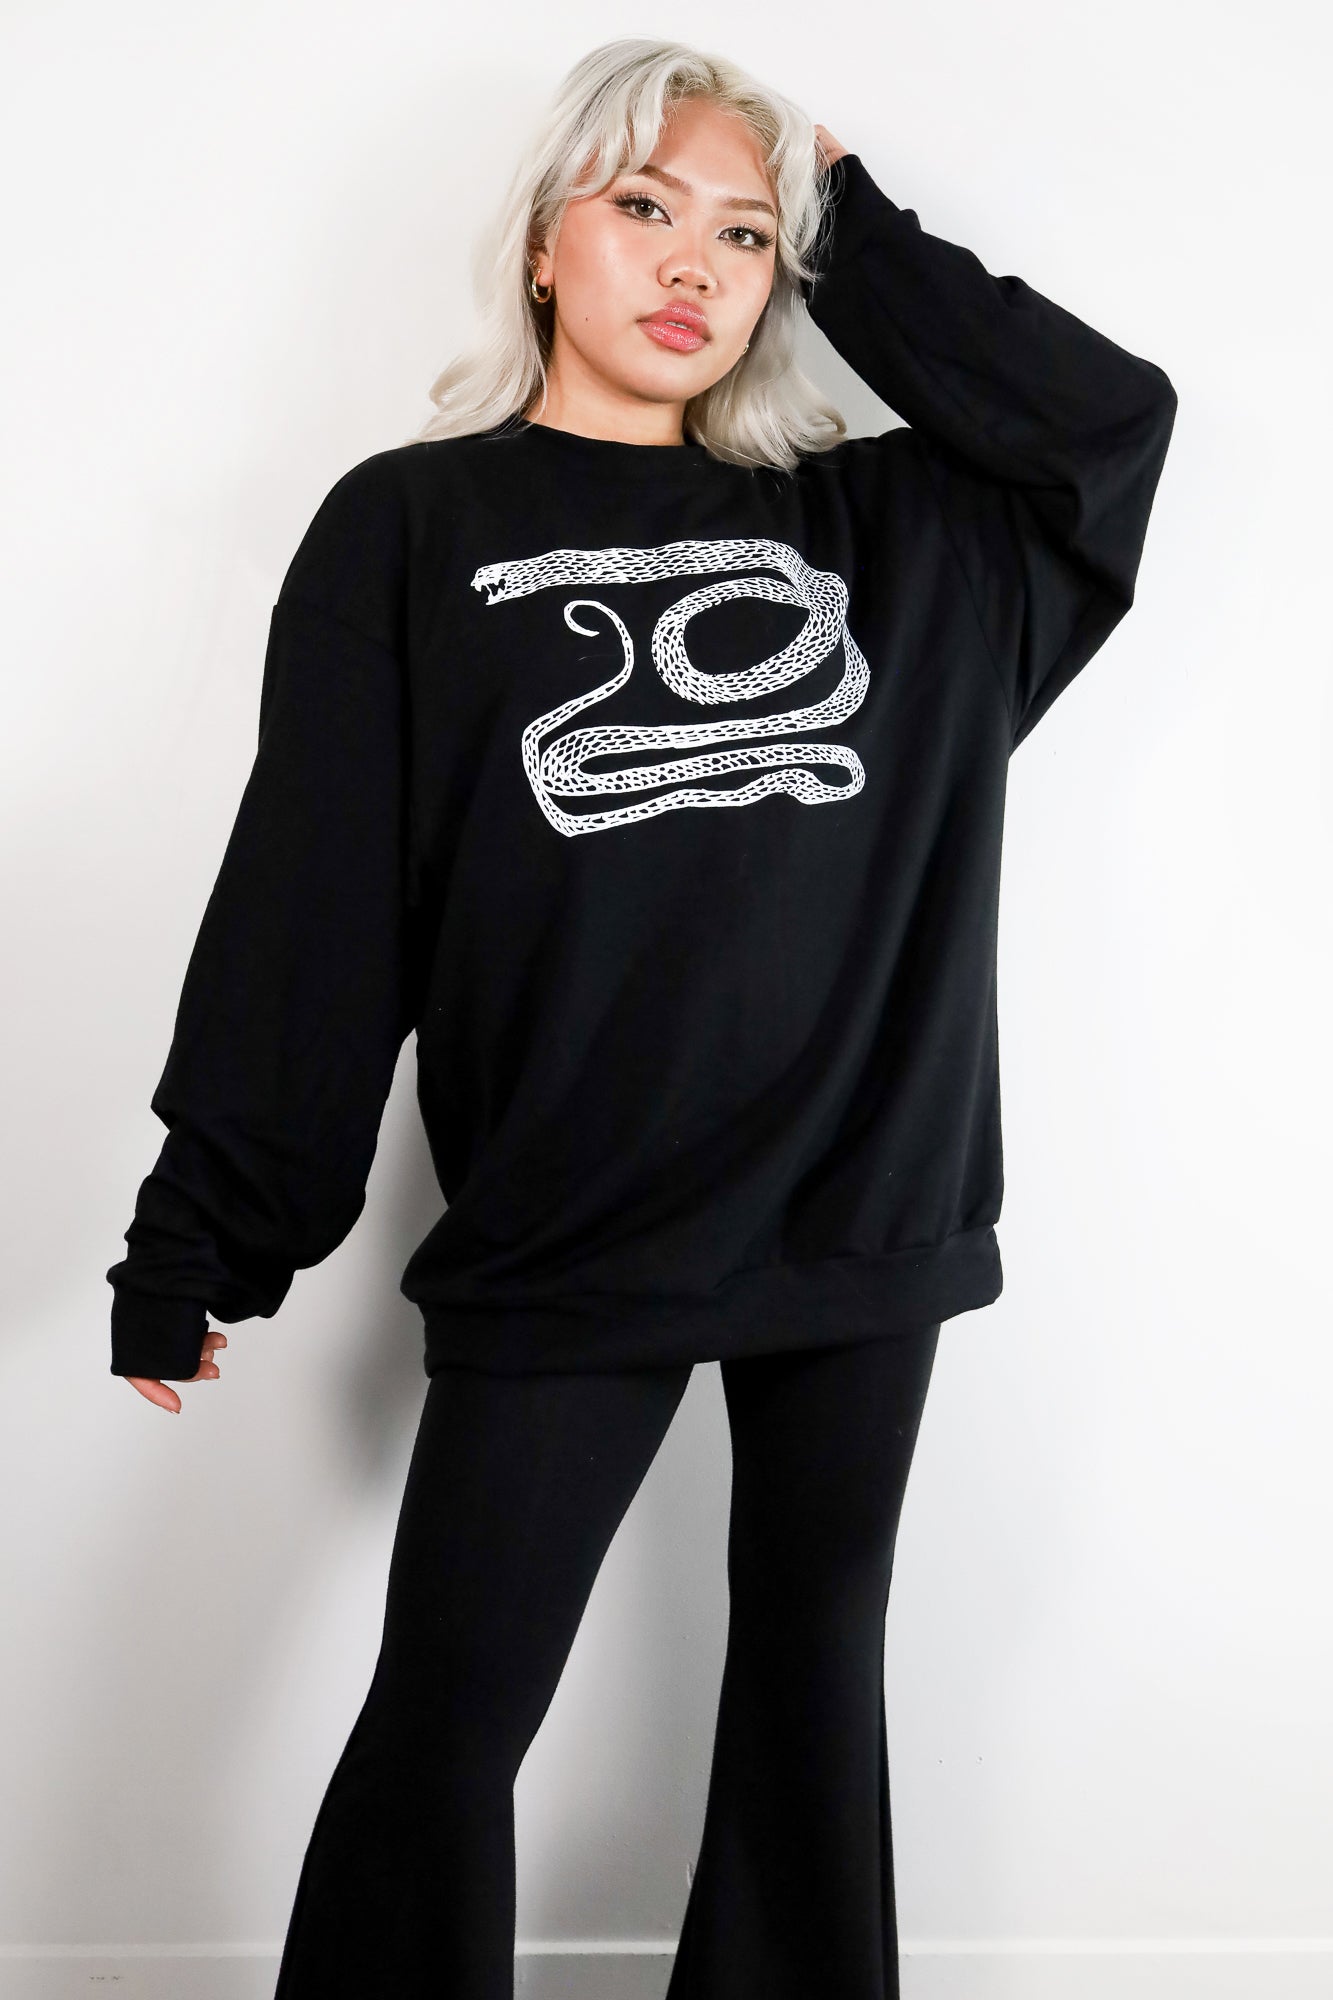 Serpent Relaxed Fit Sweatshirt - Thief and Bandit